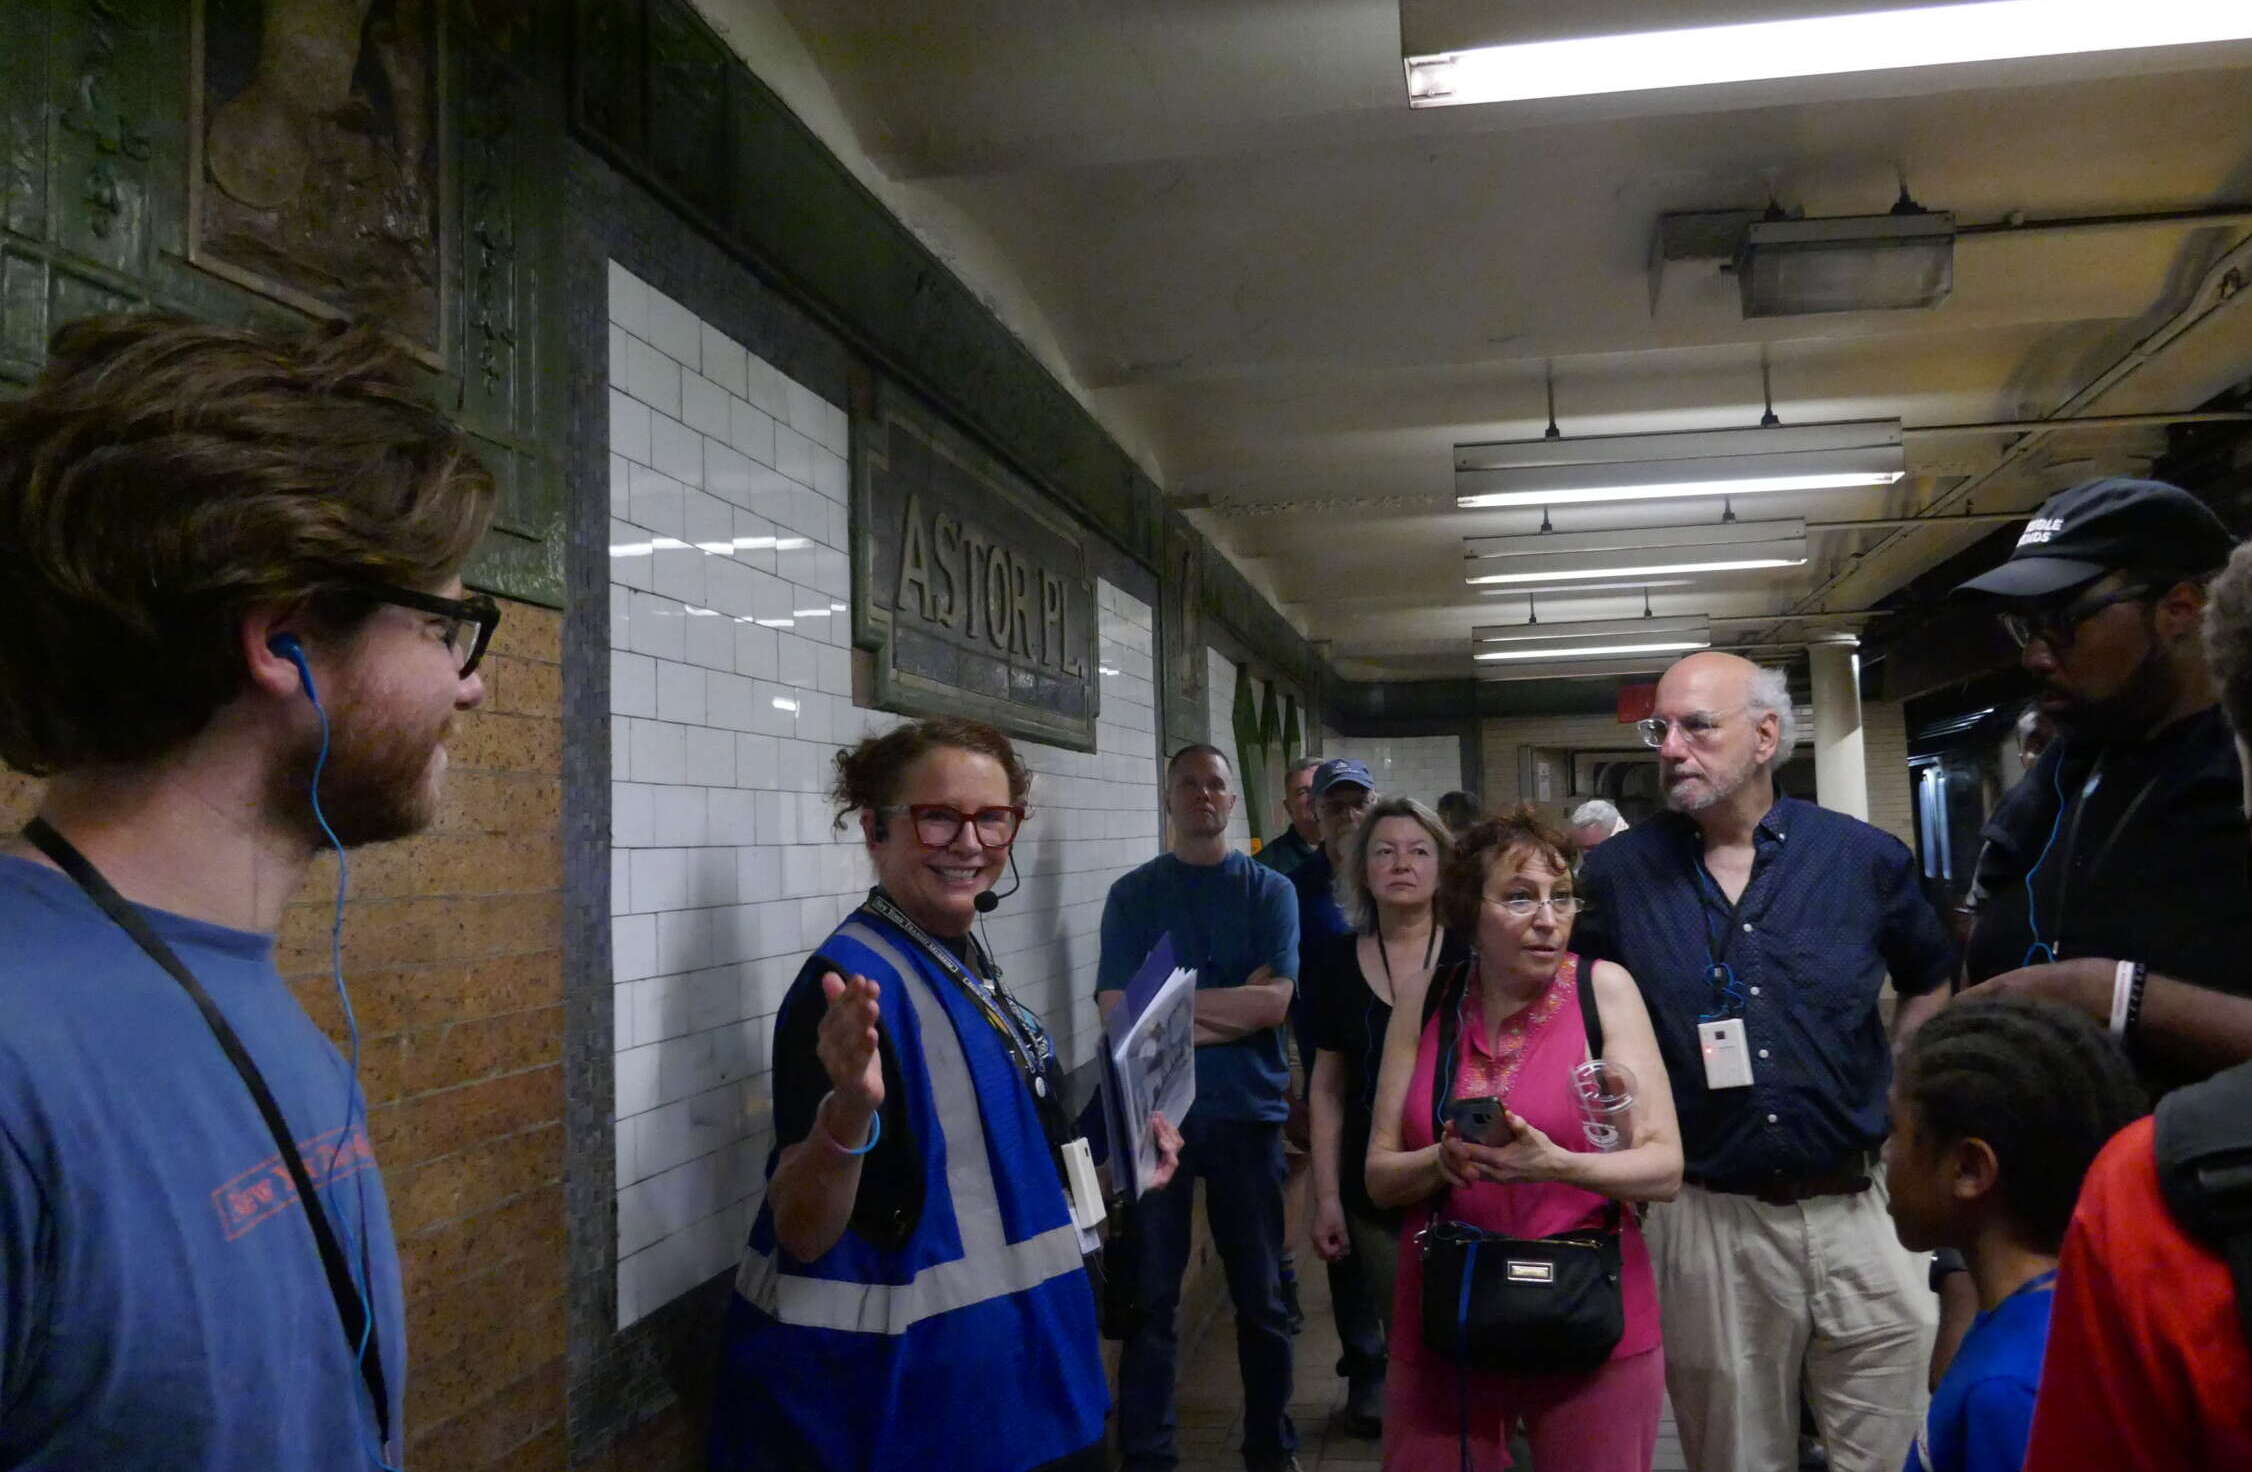 Tour guide speaks to attendees on train platform